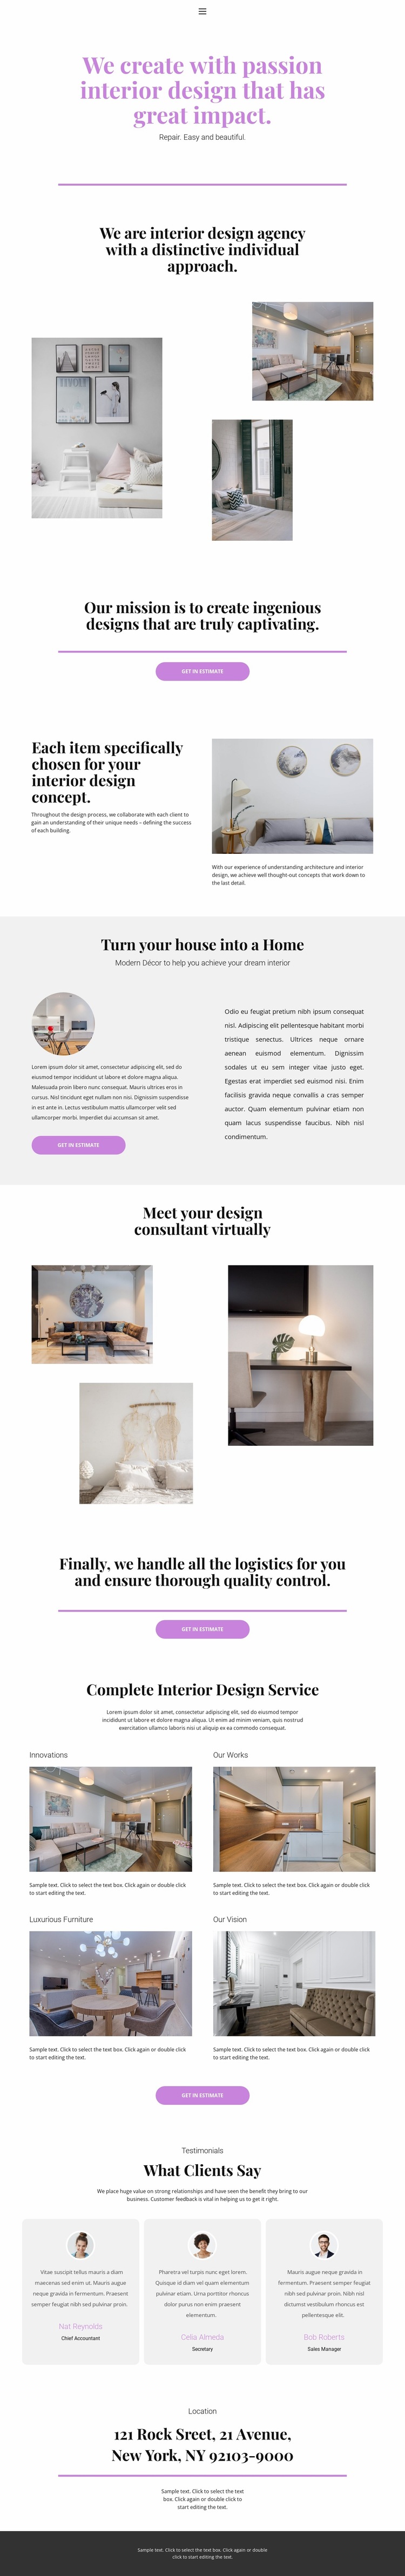 Choice of design for the house Website Builder Templates